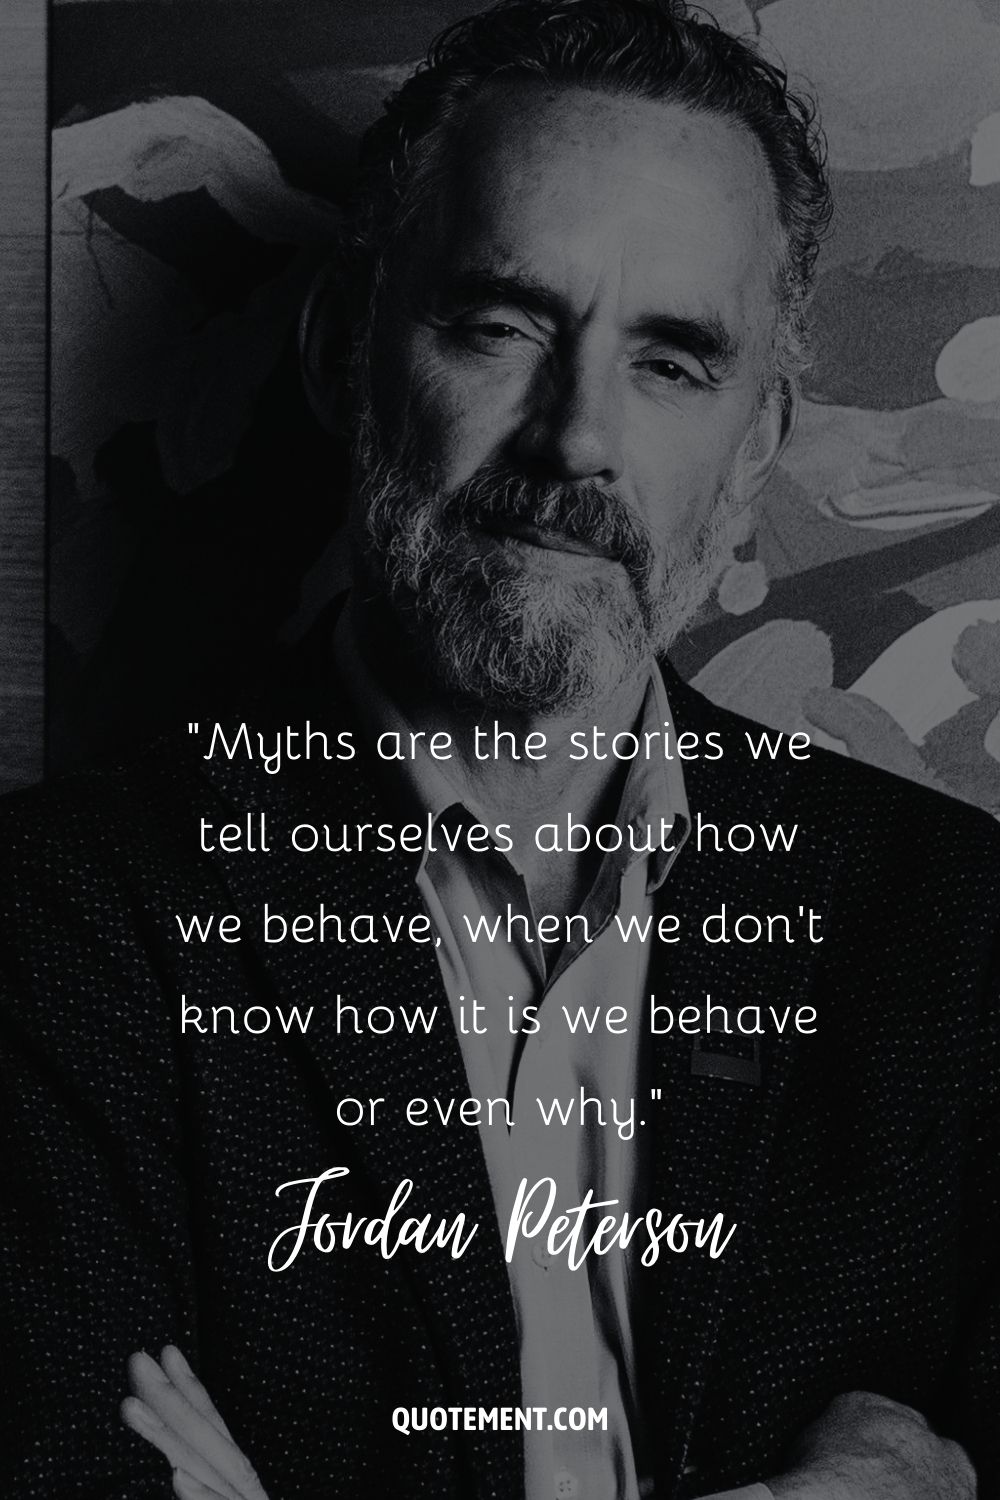 Myths are the stories we tell ourselves about how we behave, when we don’t know how it is we behave or even why